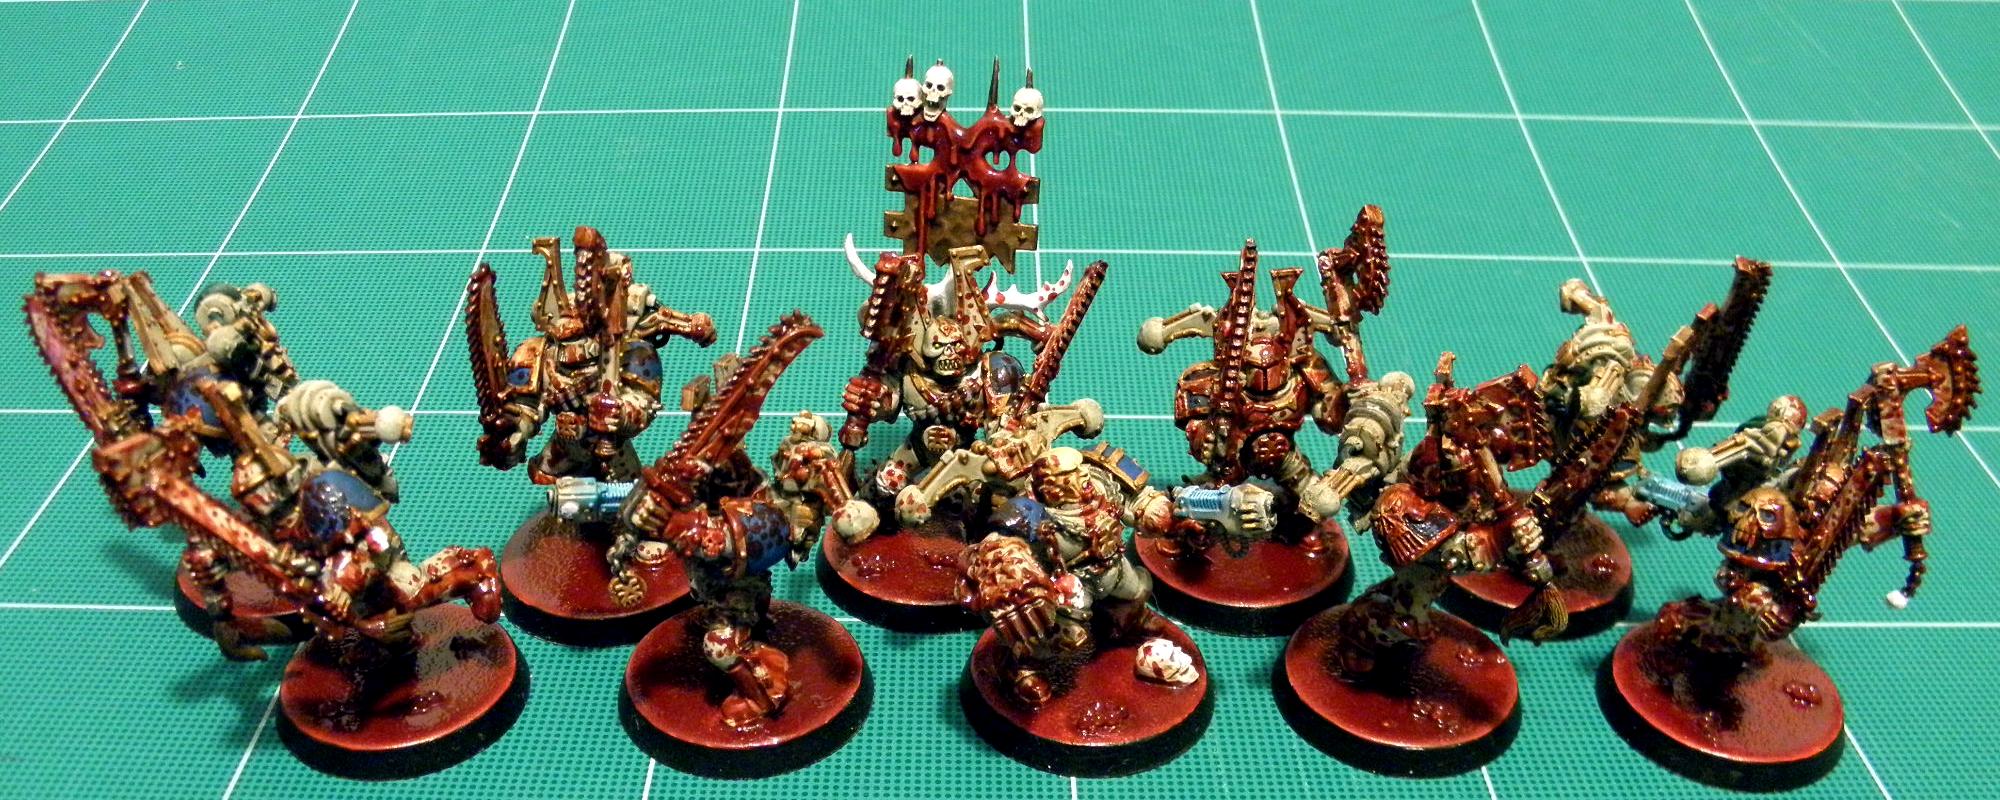 Berserkers, Blood, Blood For The Blood God, Chaos, Chaos Space Marines, Khorne, Warhammer 40,000, Warhammer Fantasy, World Eaters